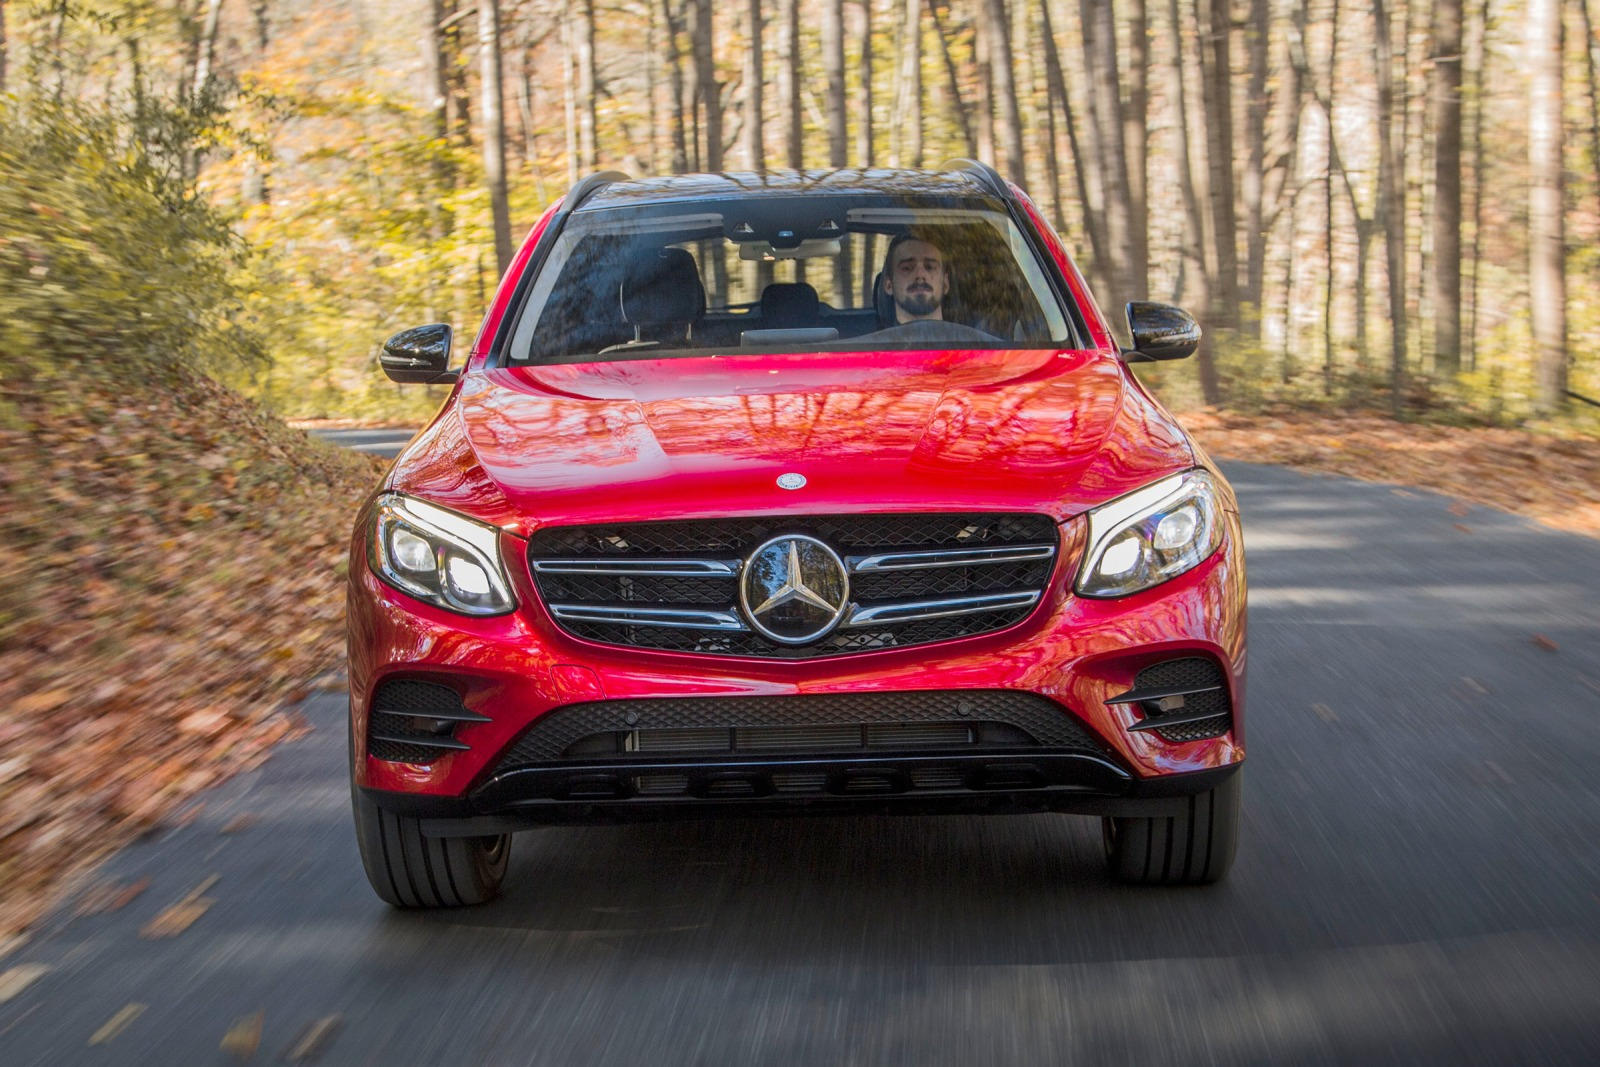 2019 Mercedes-Benz GLC-Class SUV Front View Driving